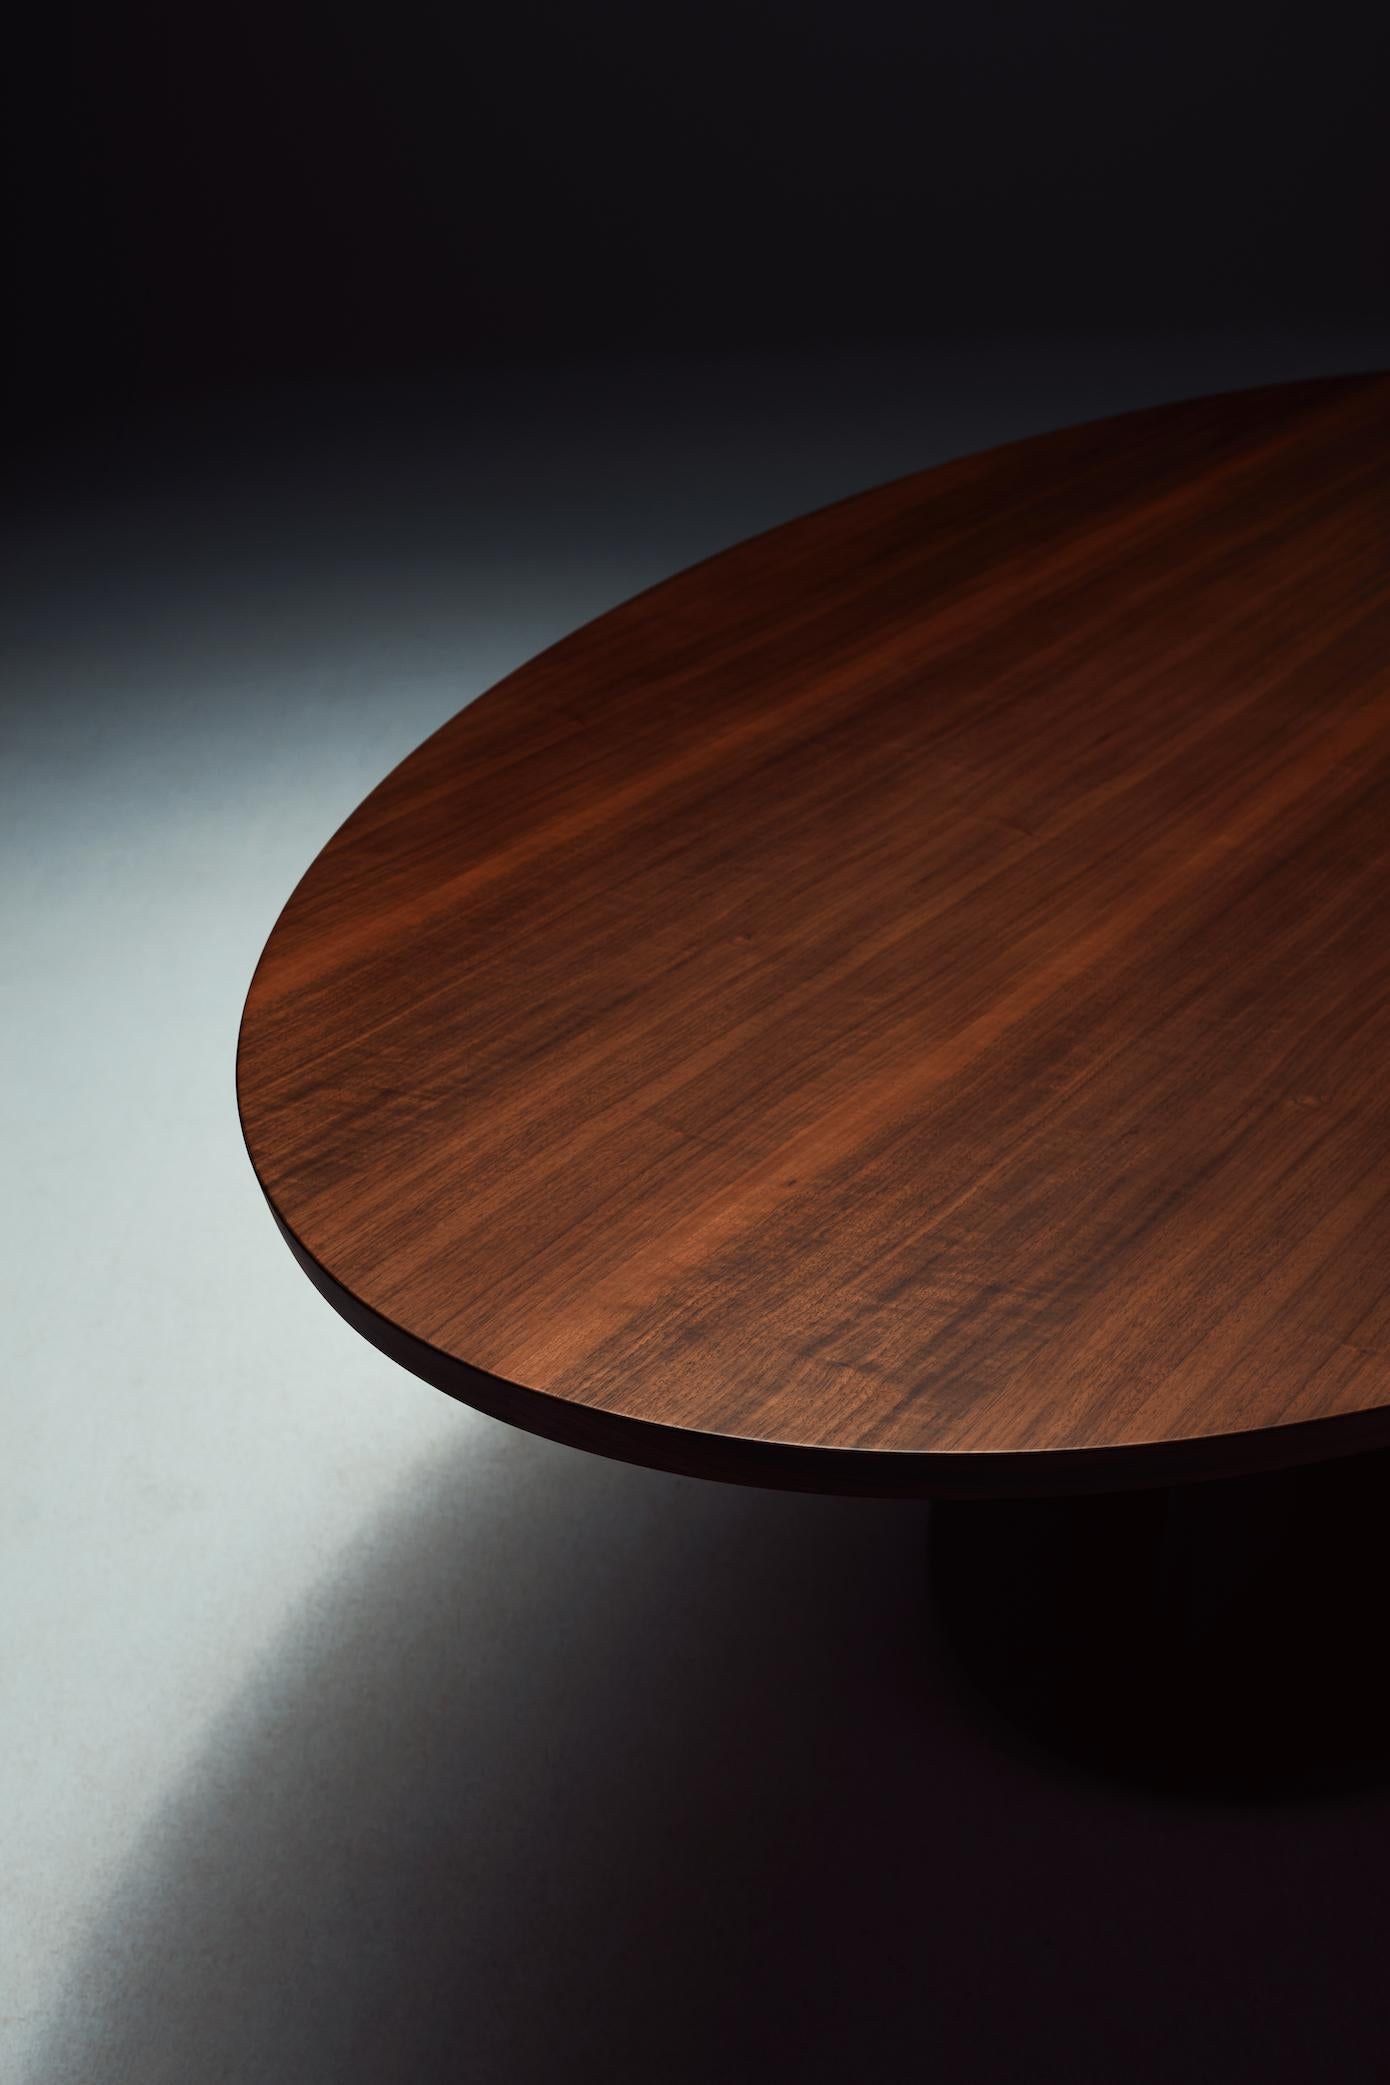 La Manufacture-Paris Intersection Canaletto Walnut Oval Table by Neri & Hu For Sale 3